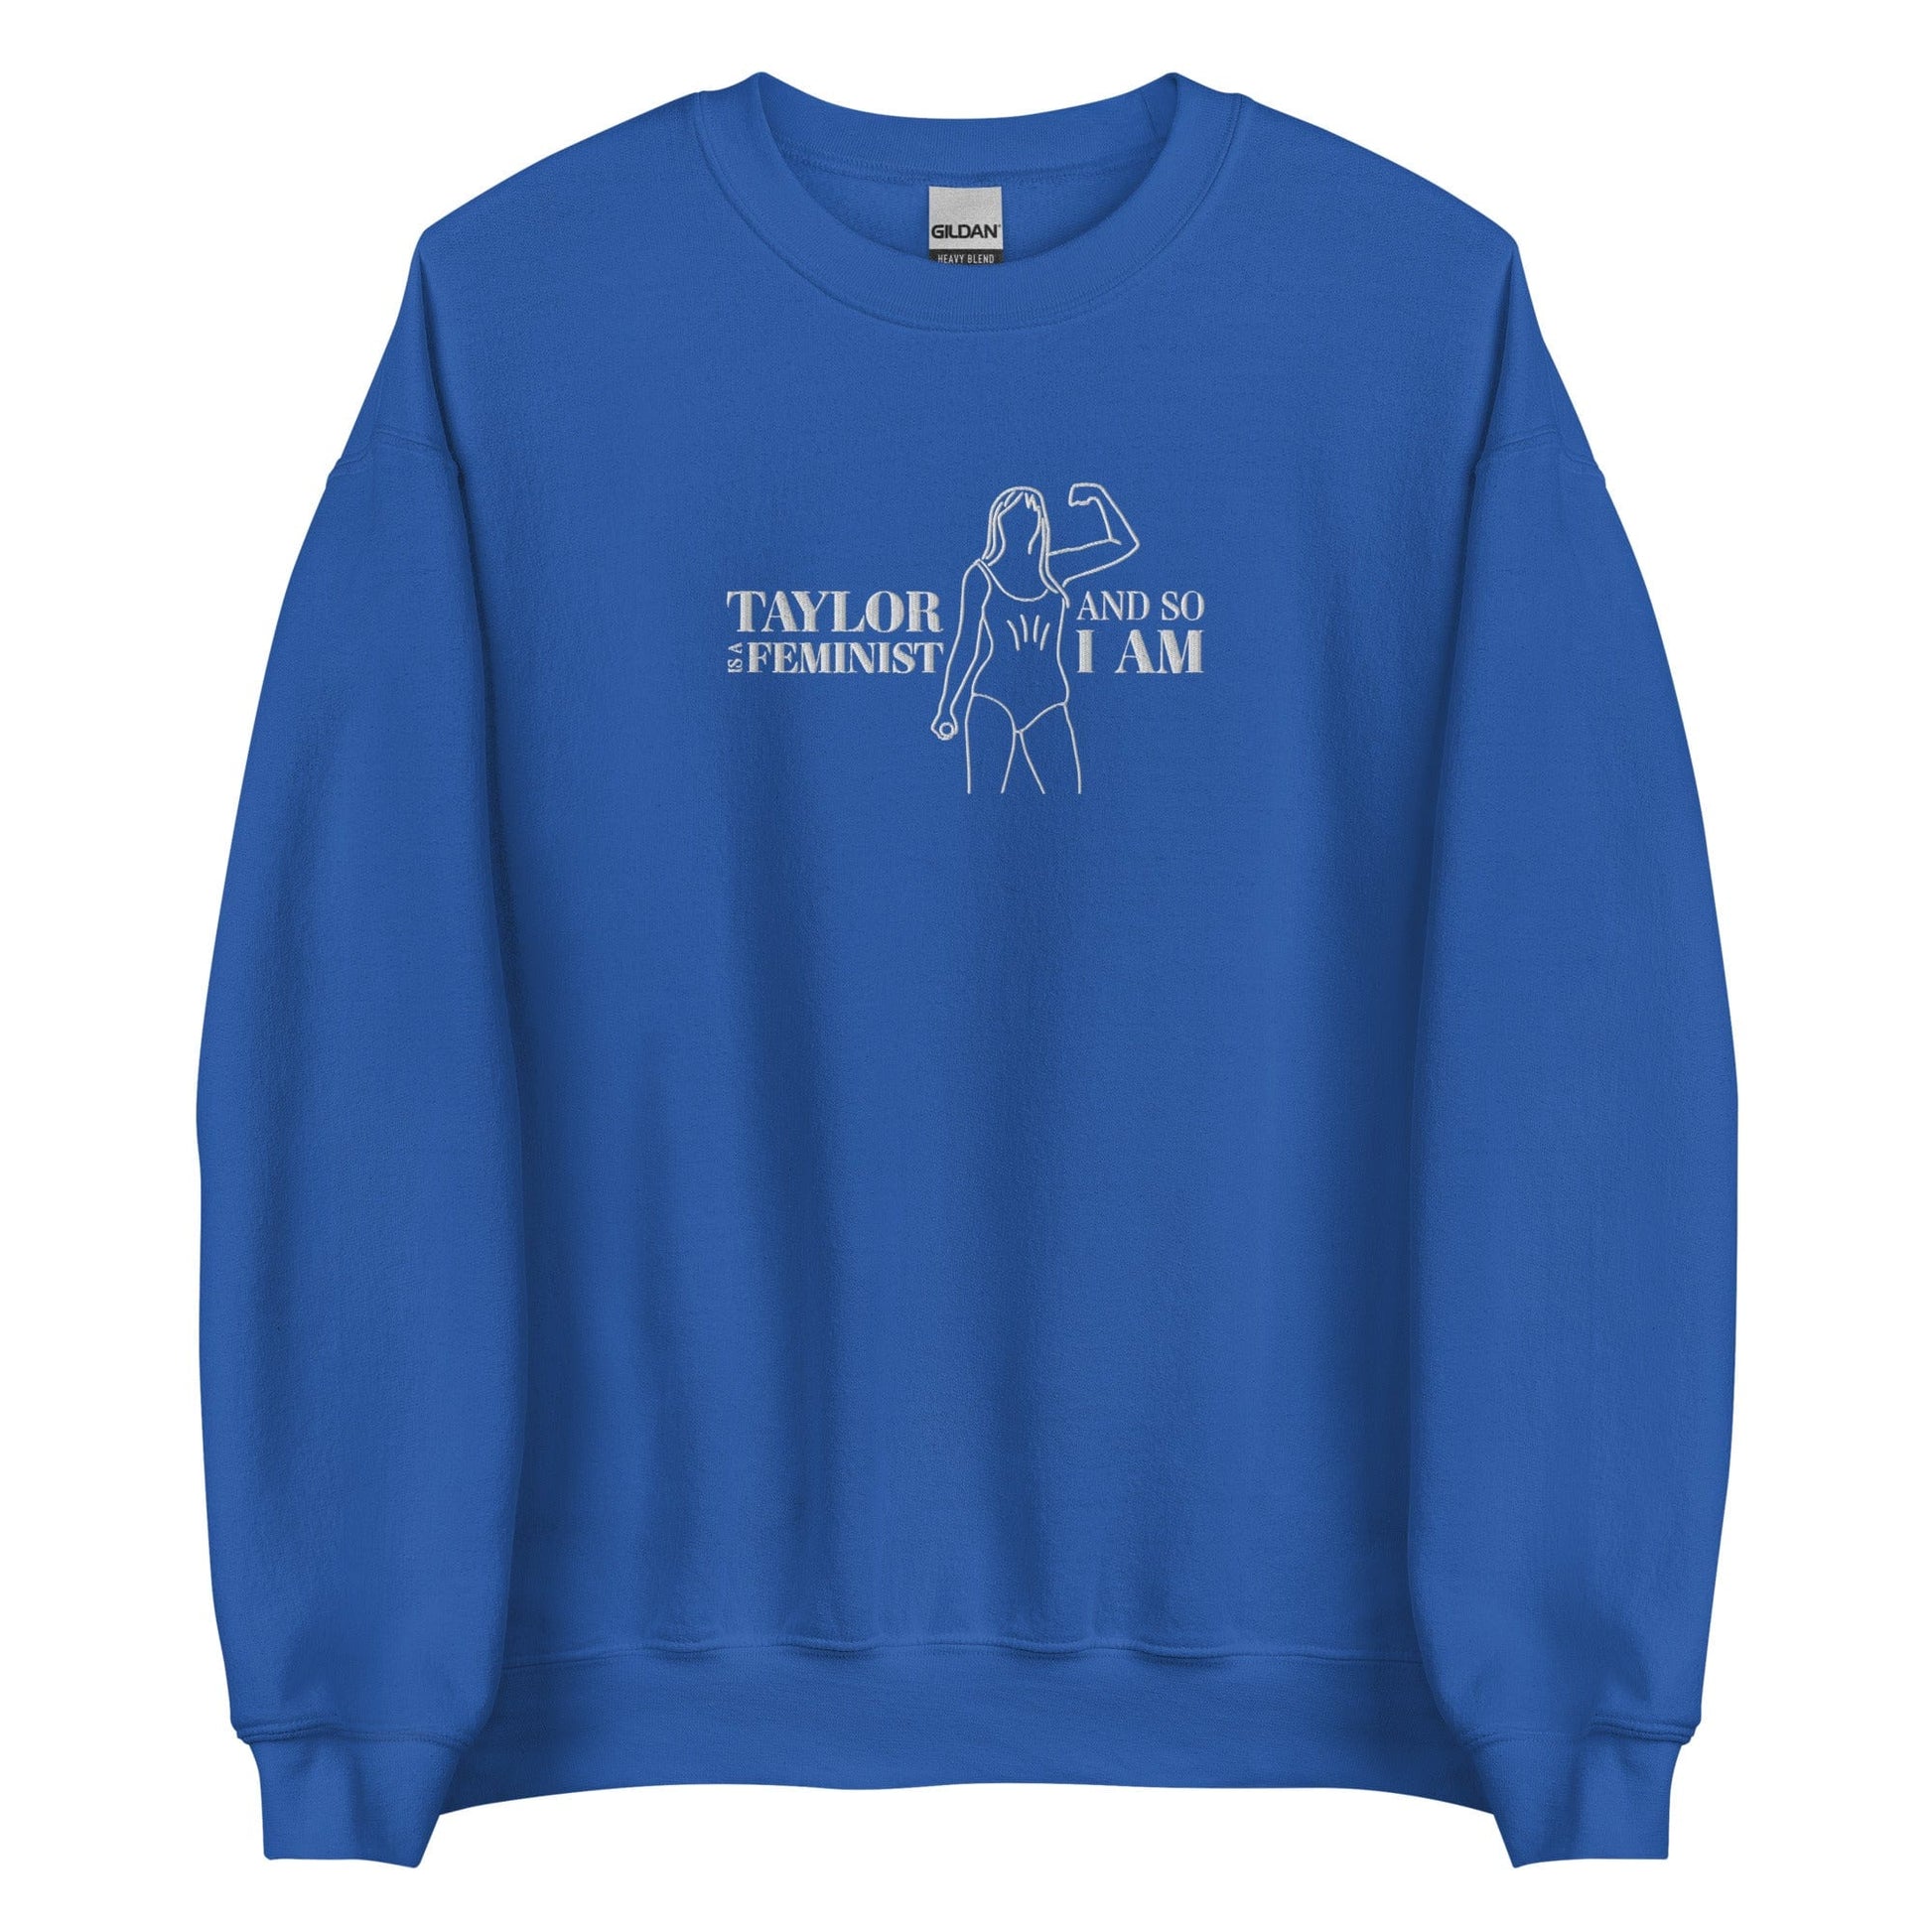 Taylor-embroidery-feminist-sweatshirt-royal-front